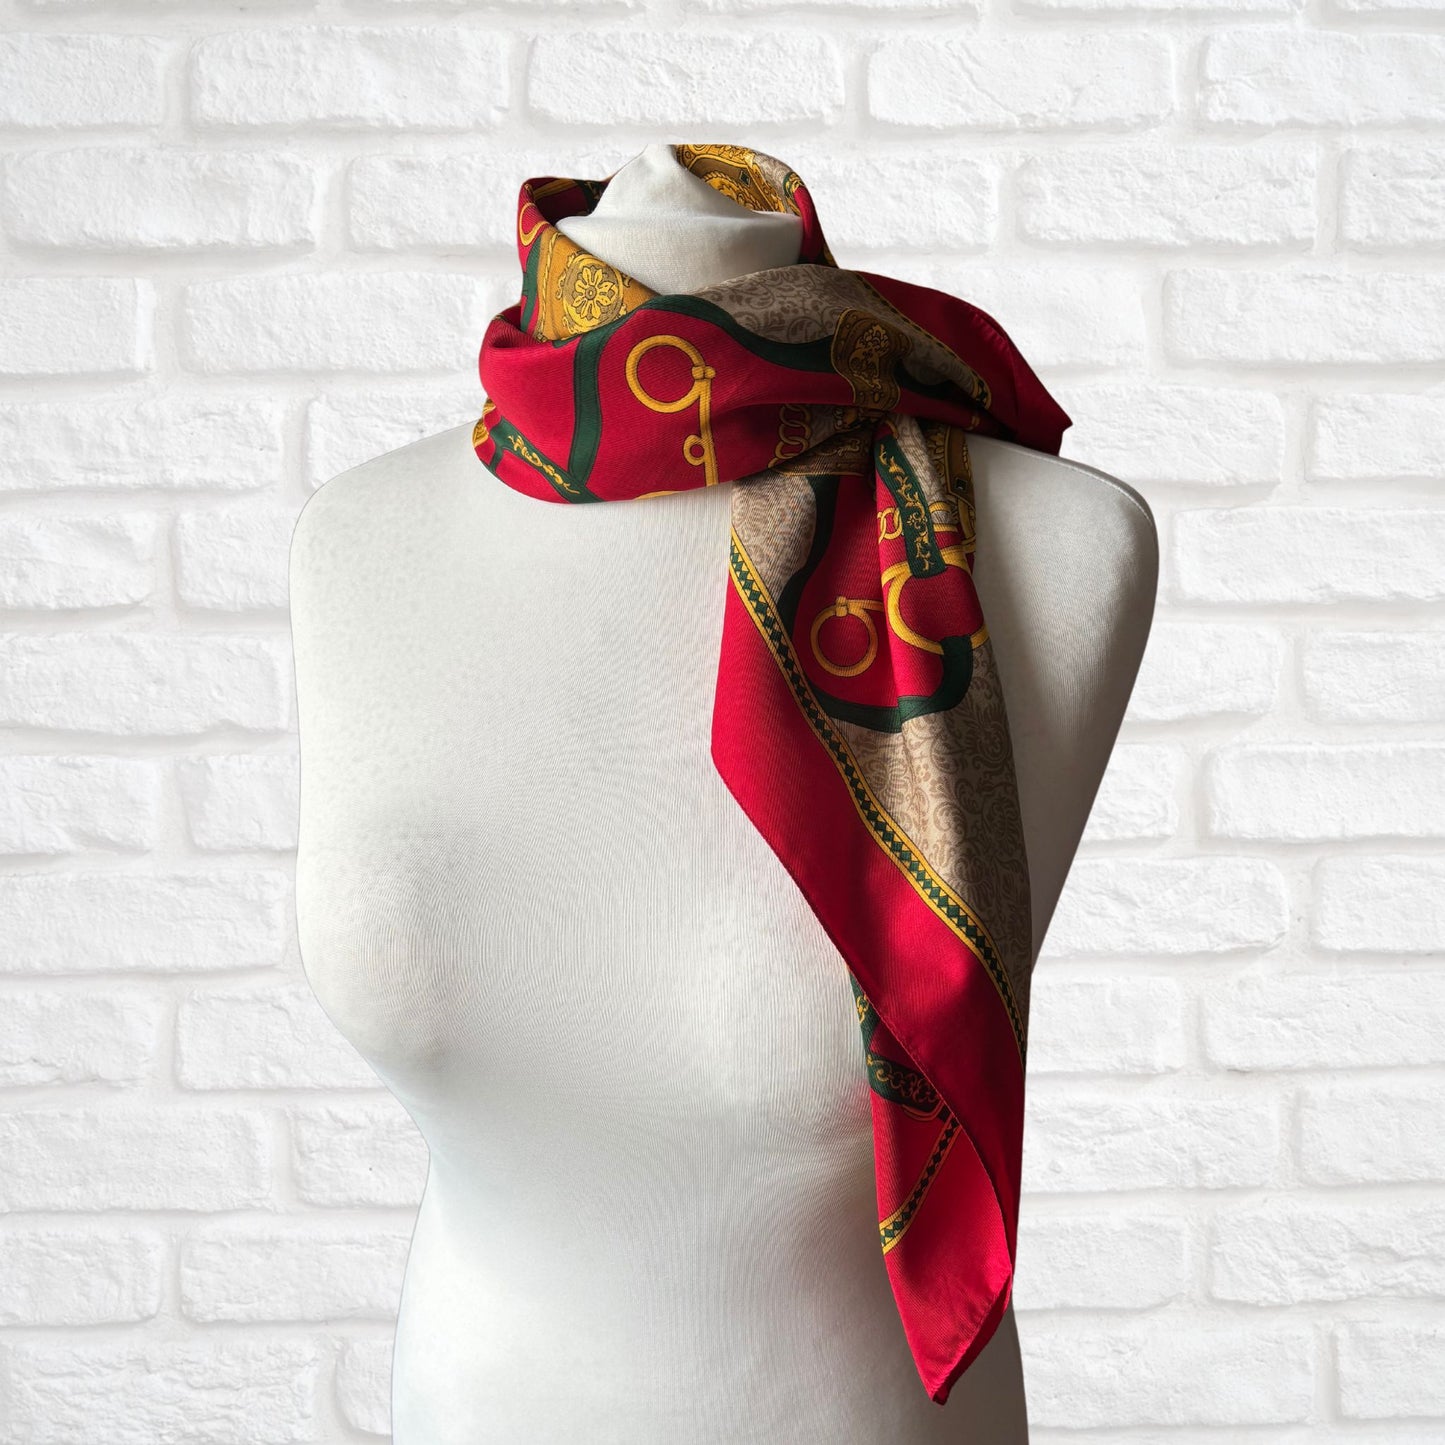 Red, Green and Gold Equestrian Style Large Square Vintage Scarf. Great Gift idea